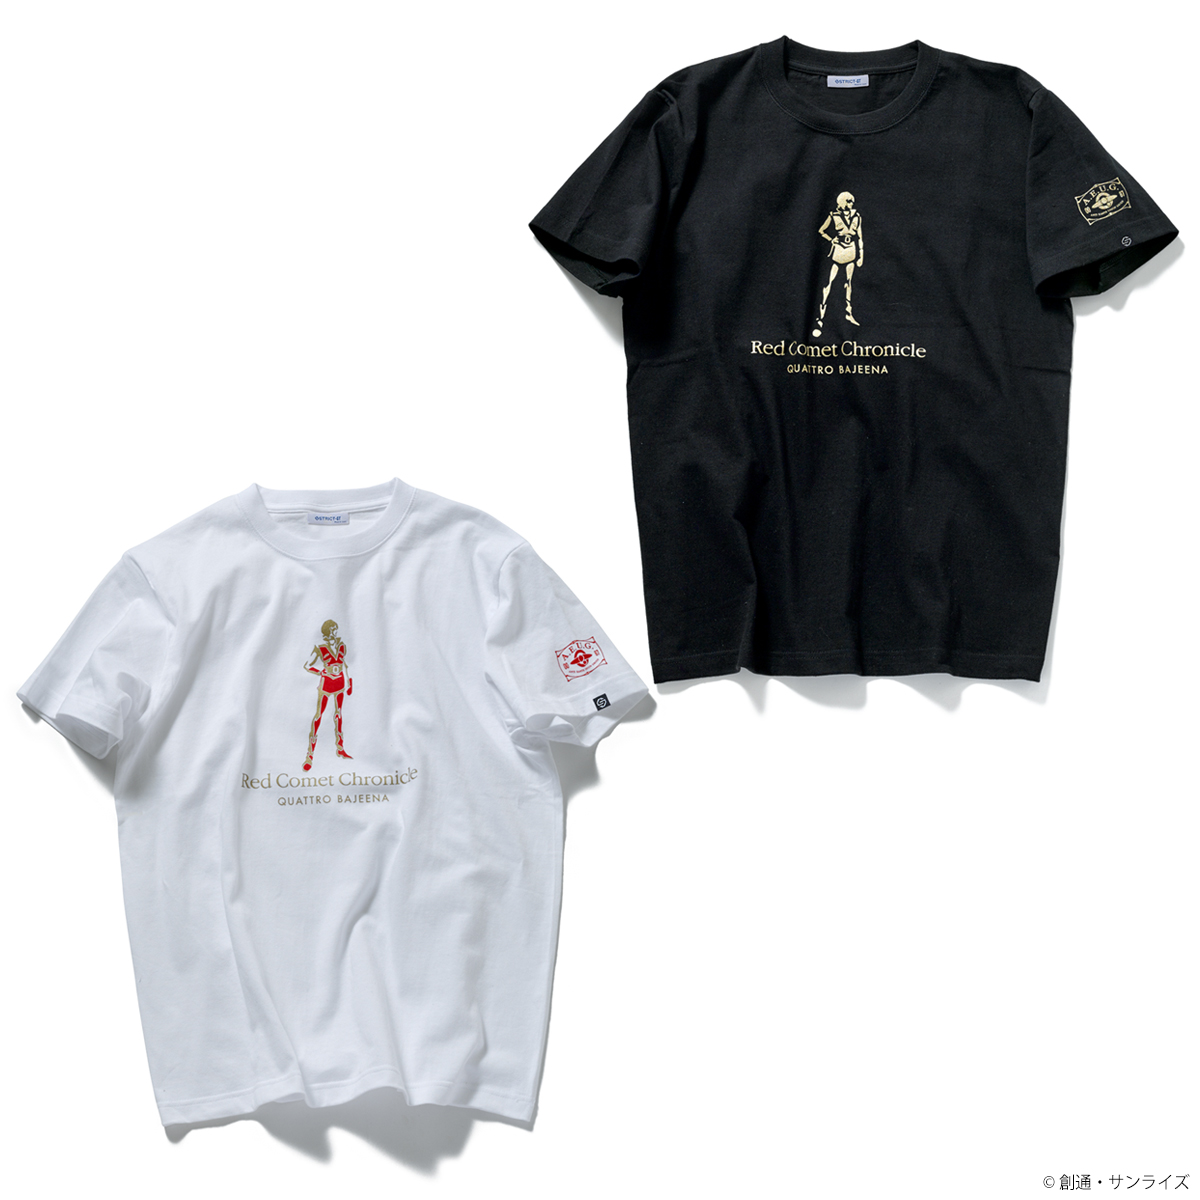 STRICT-G『機動戦士Zガンダム』Red Comet Chronicle Tシャツ クワトロ・バジーナ